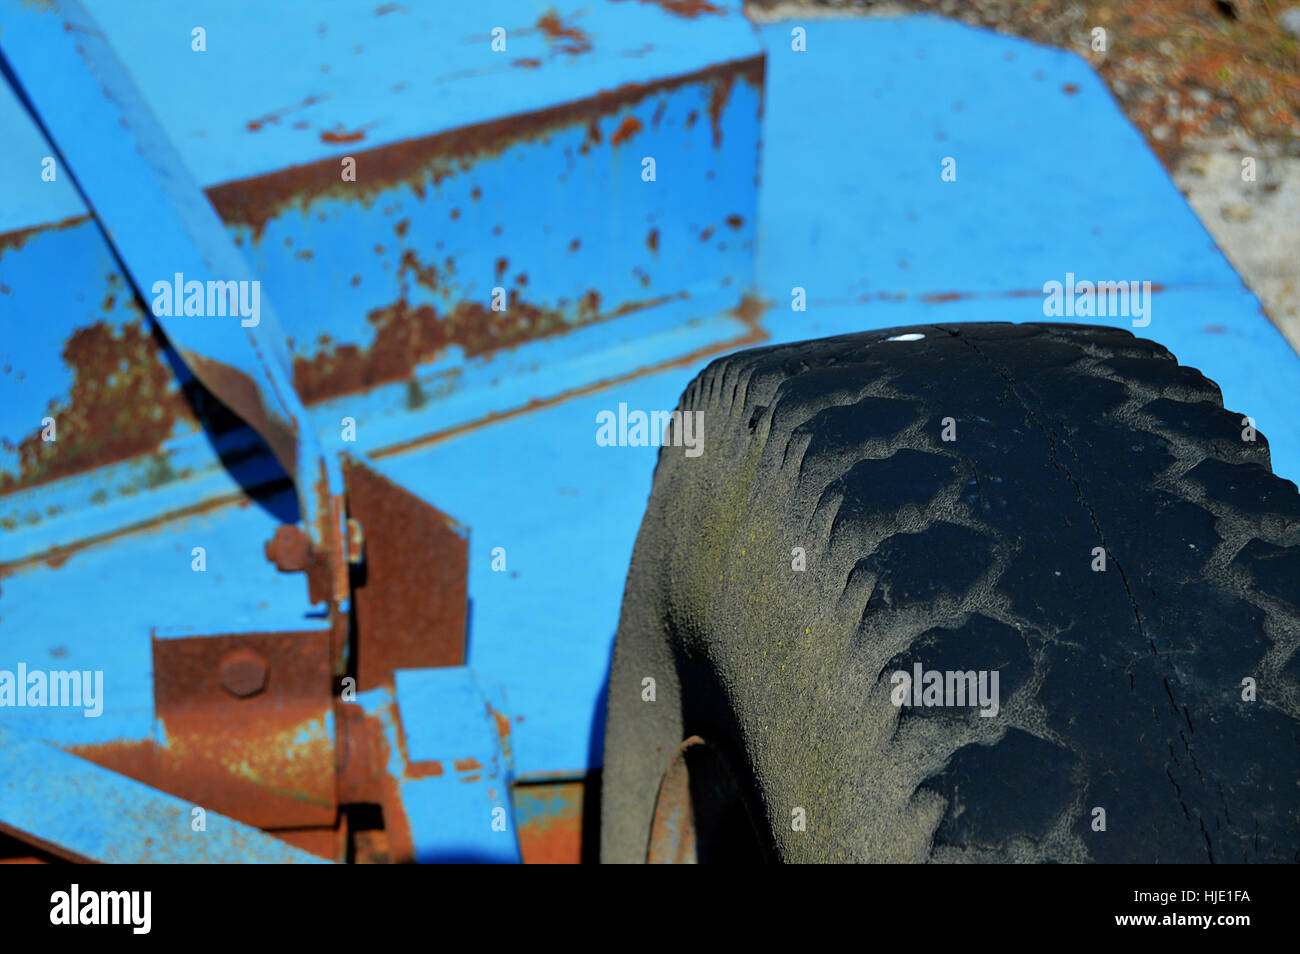 A blue industrial lawn mower sitting deserted on  broken concrete and weeds. Stock Photo